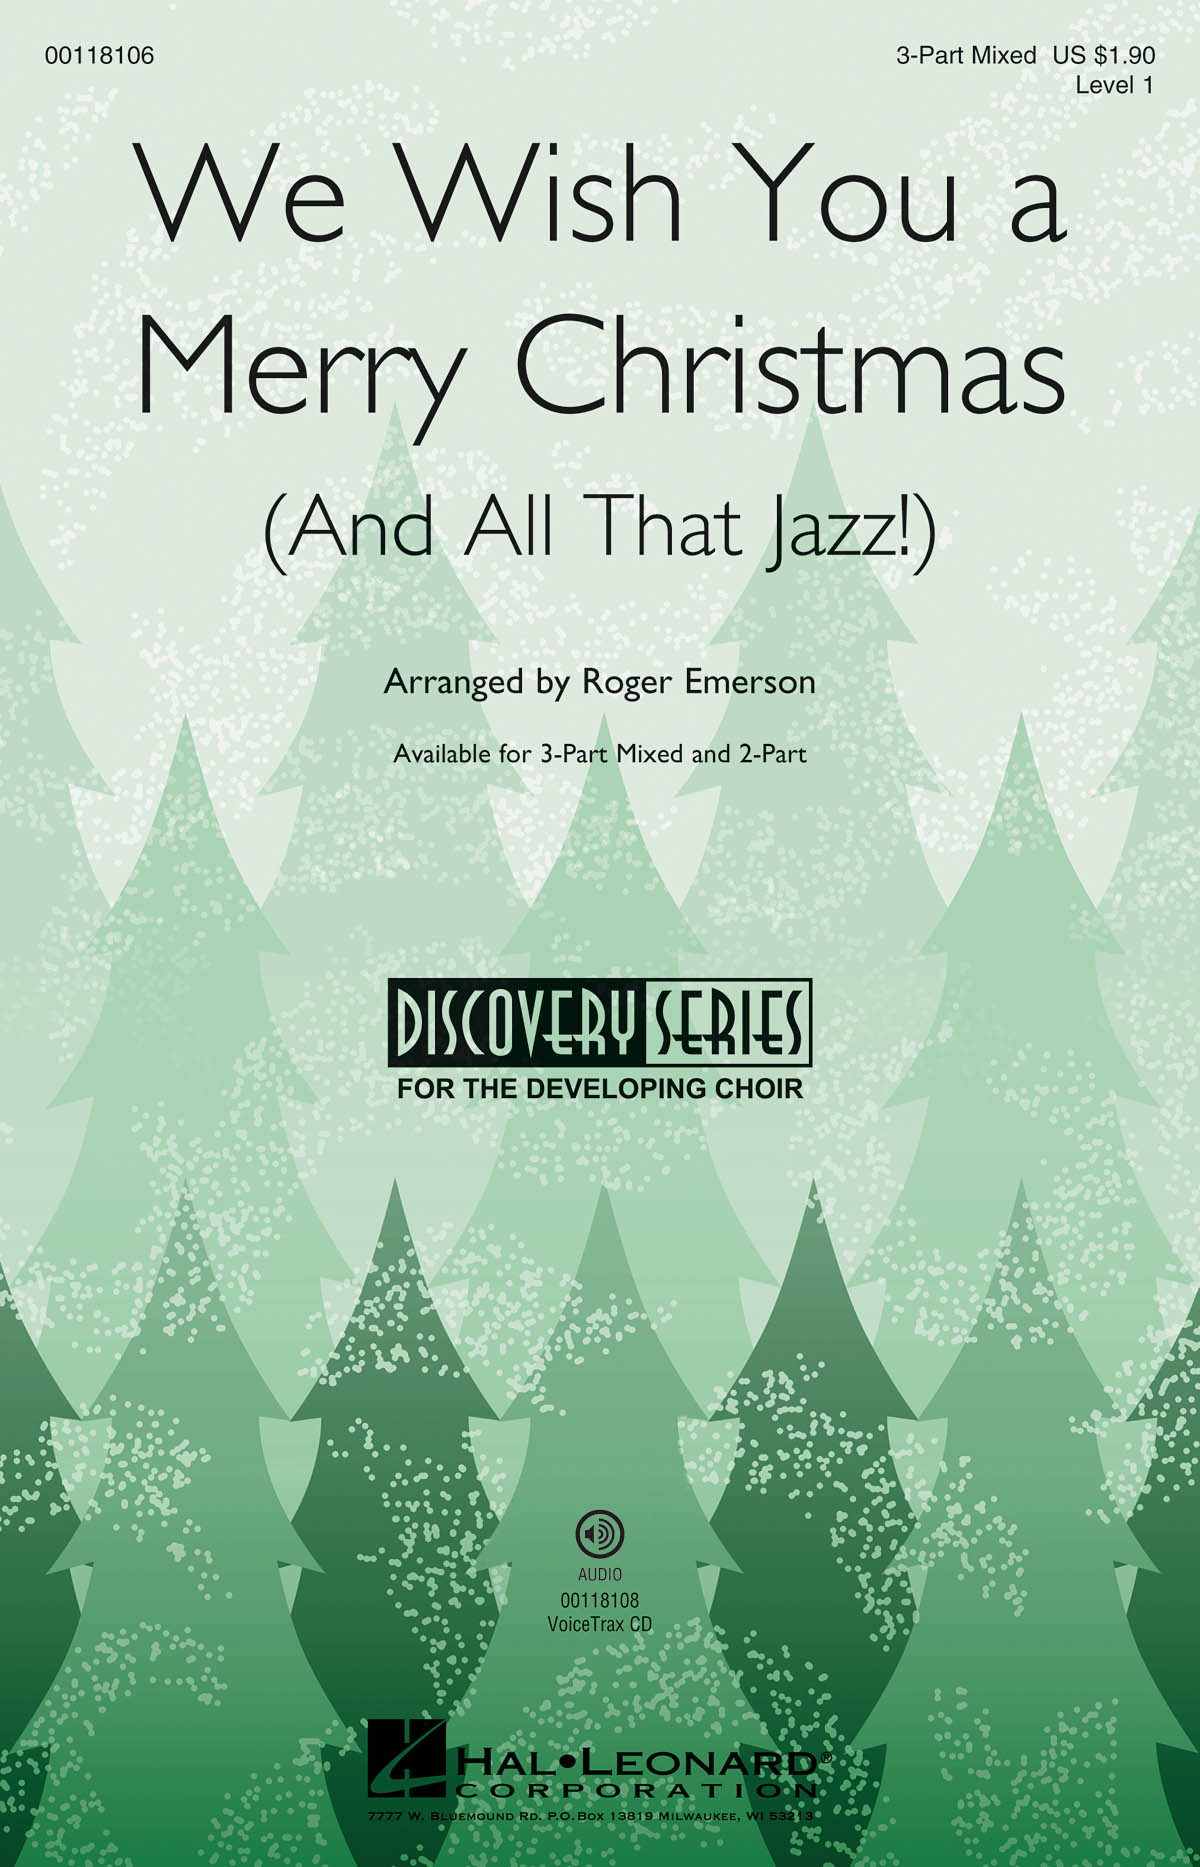 We Wish You a Merry Christmas and All That Jazz - Discovery Level 1 - pro sbor 3-Part